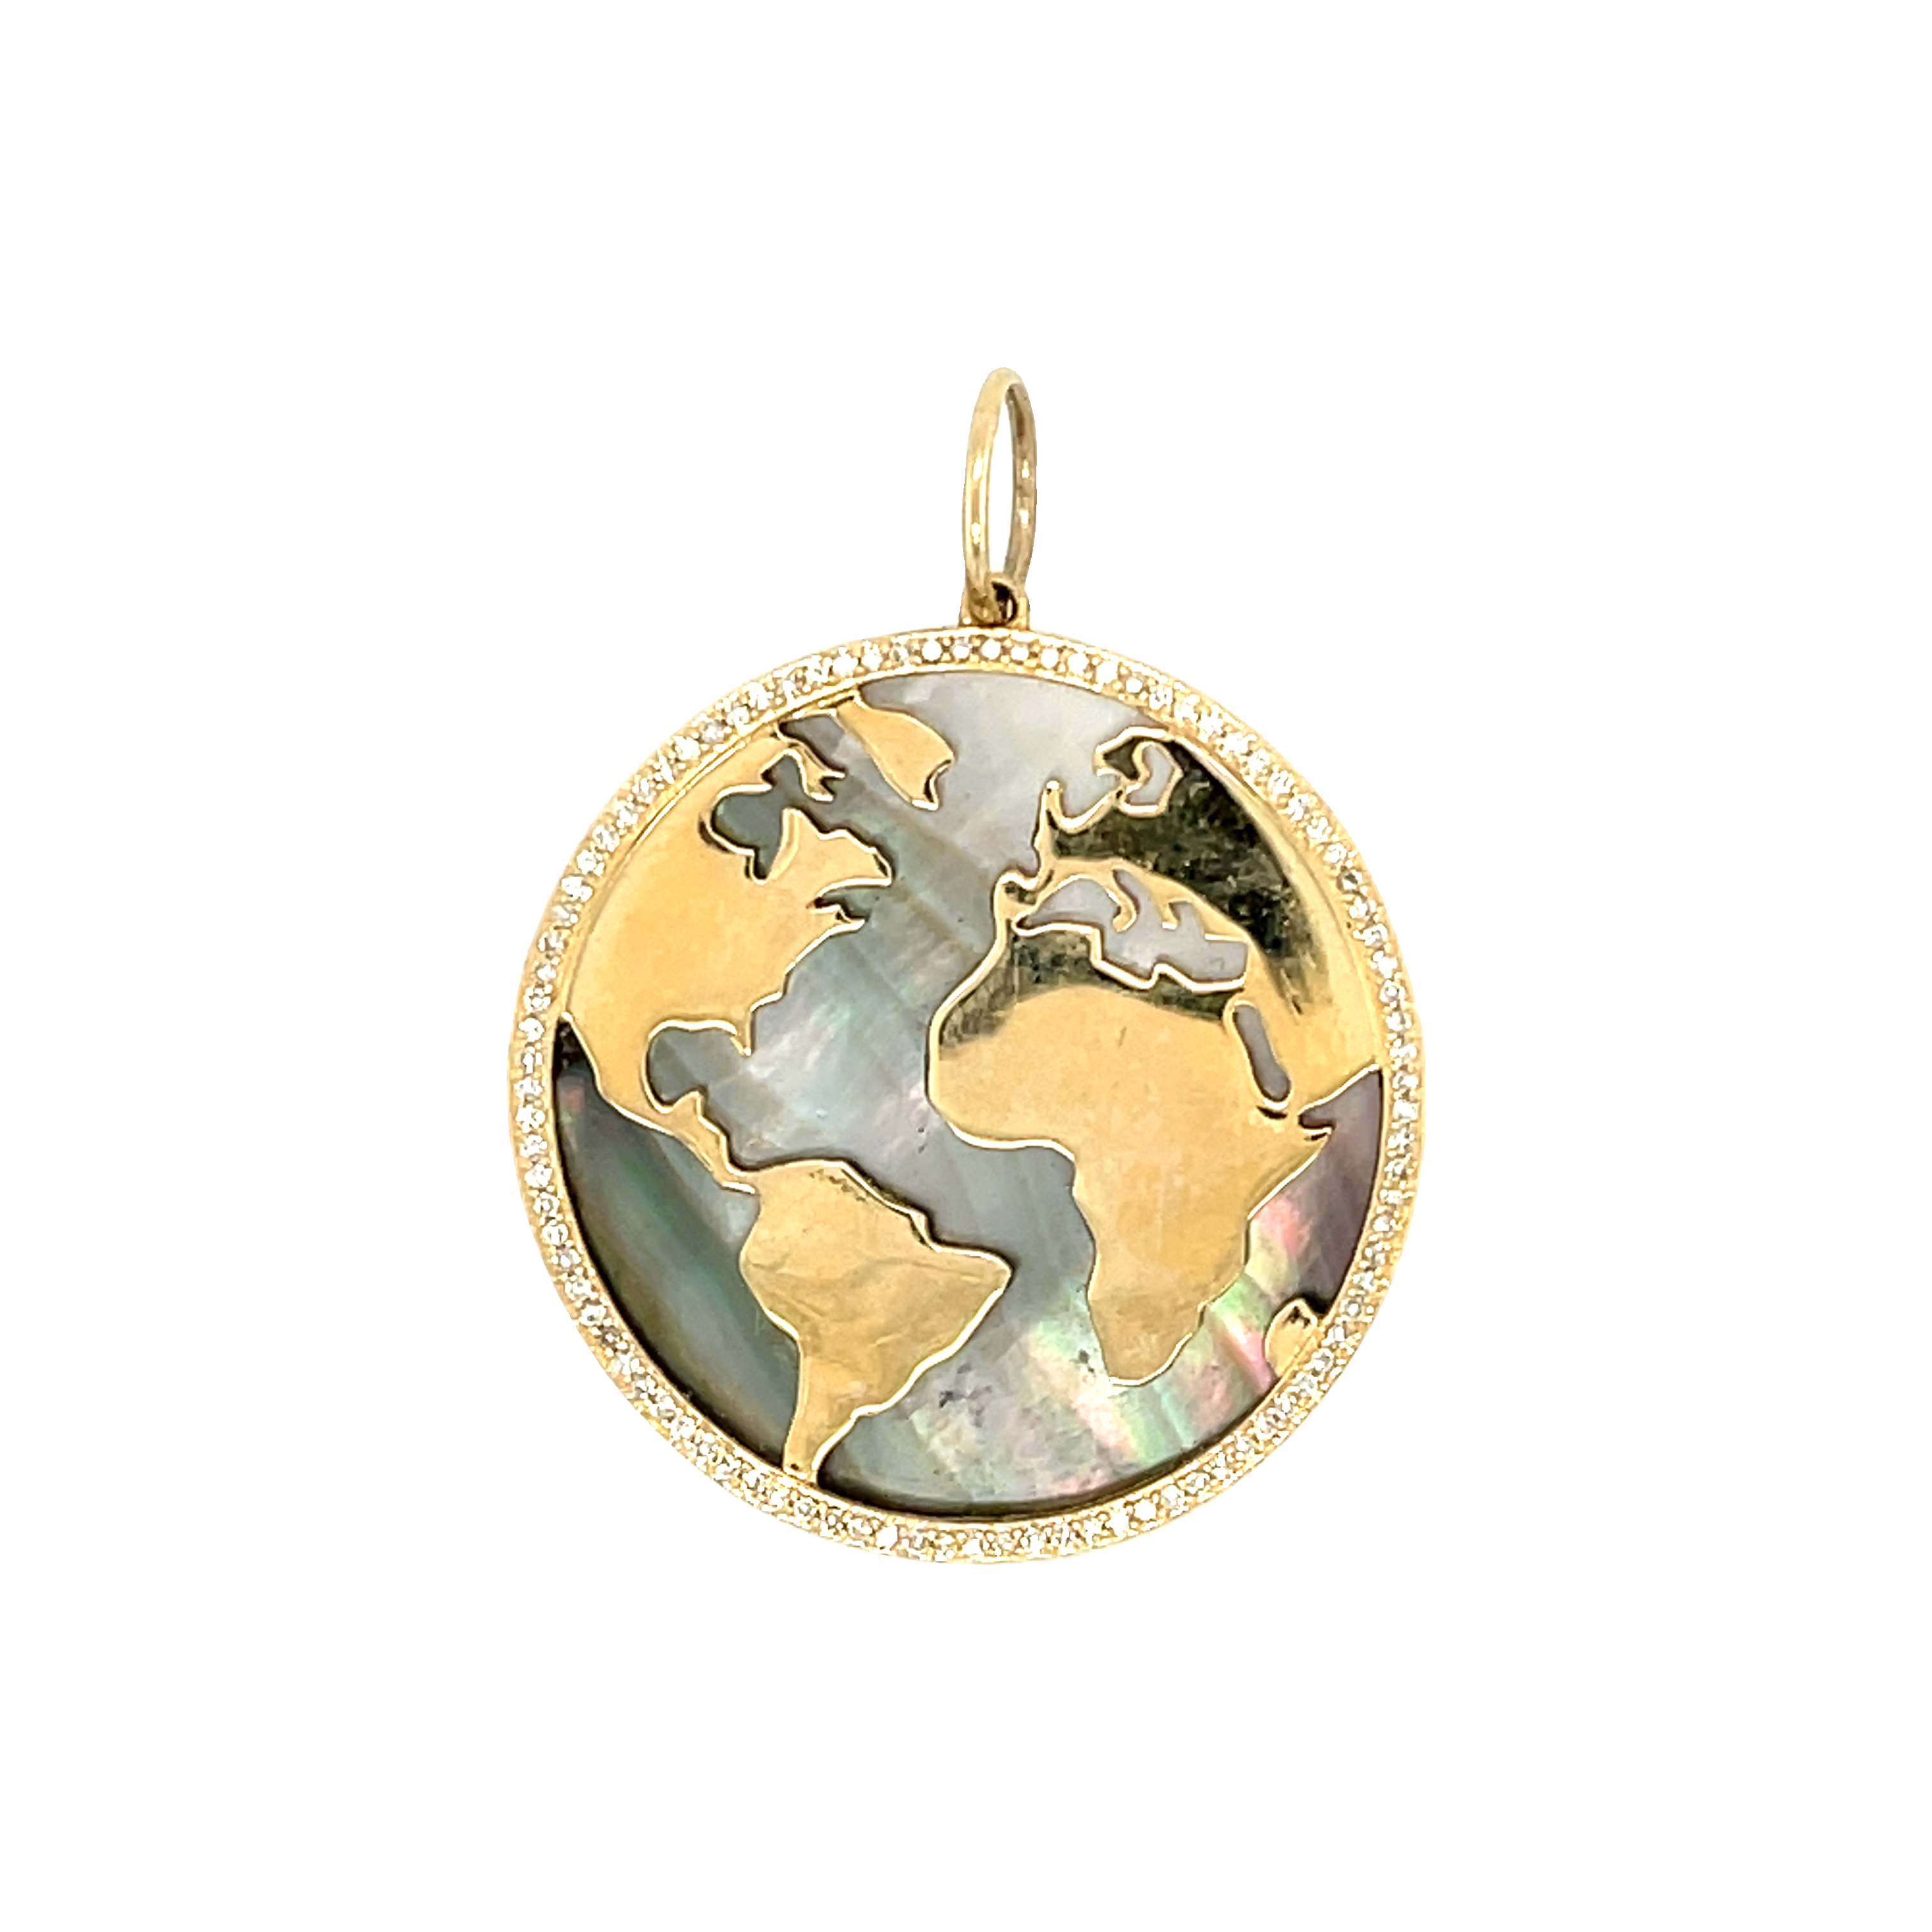 Featured image for “Abalone World Pendant”